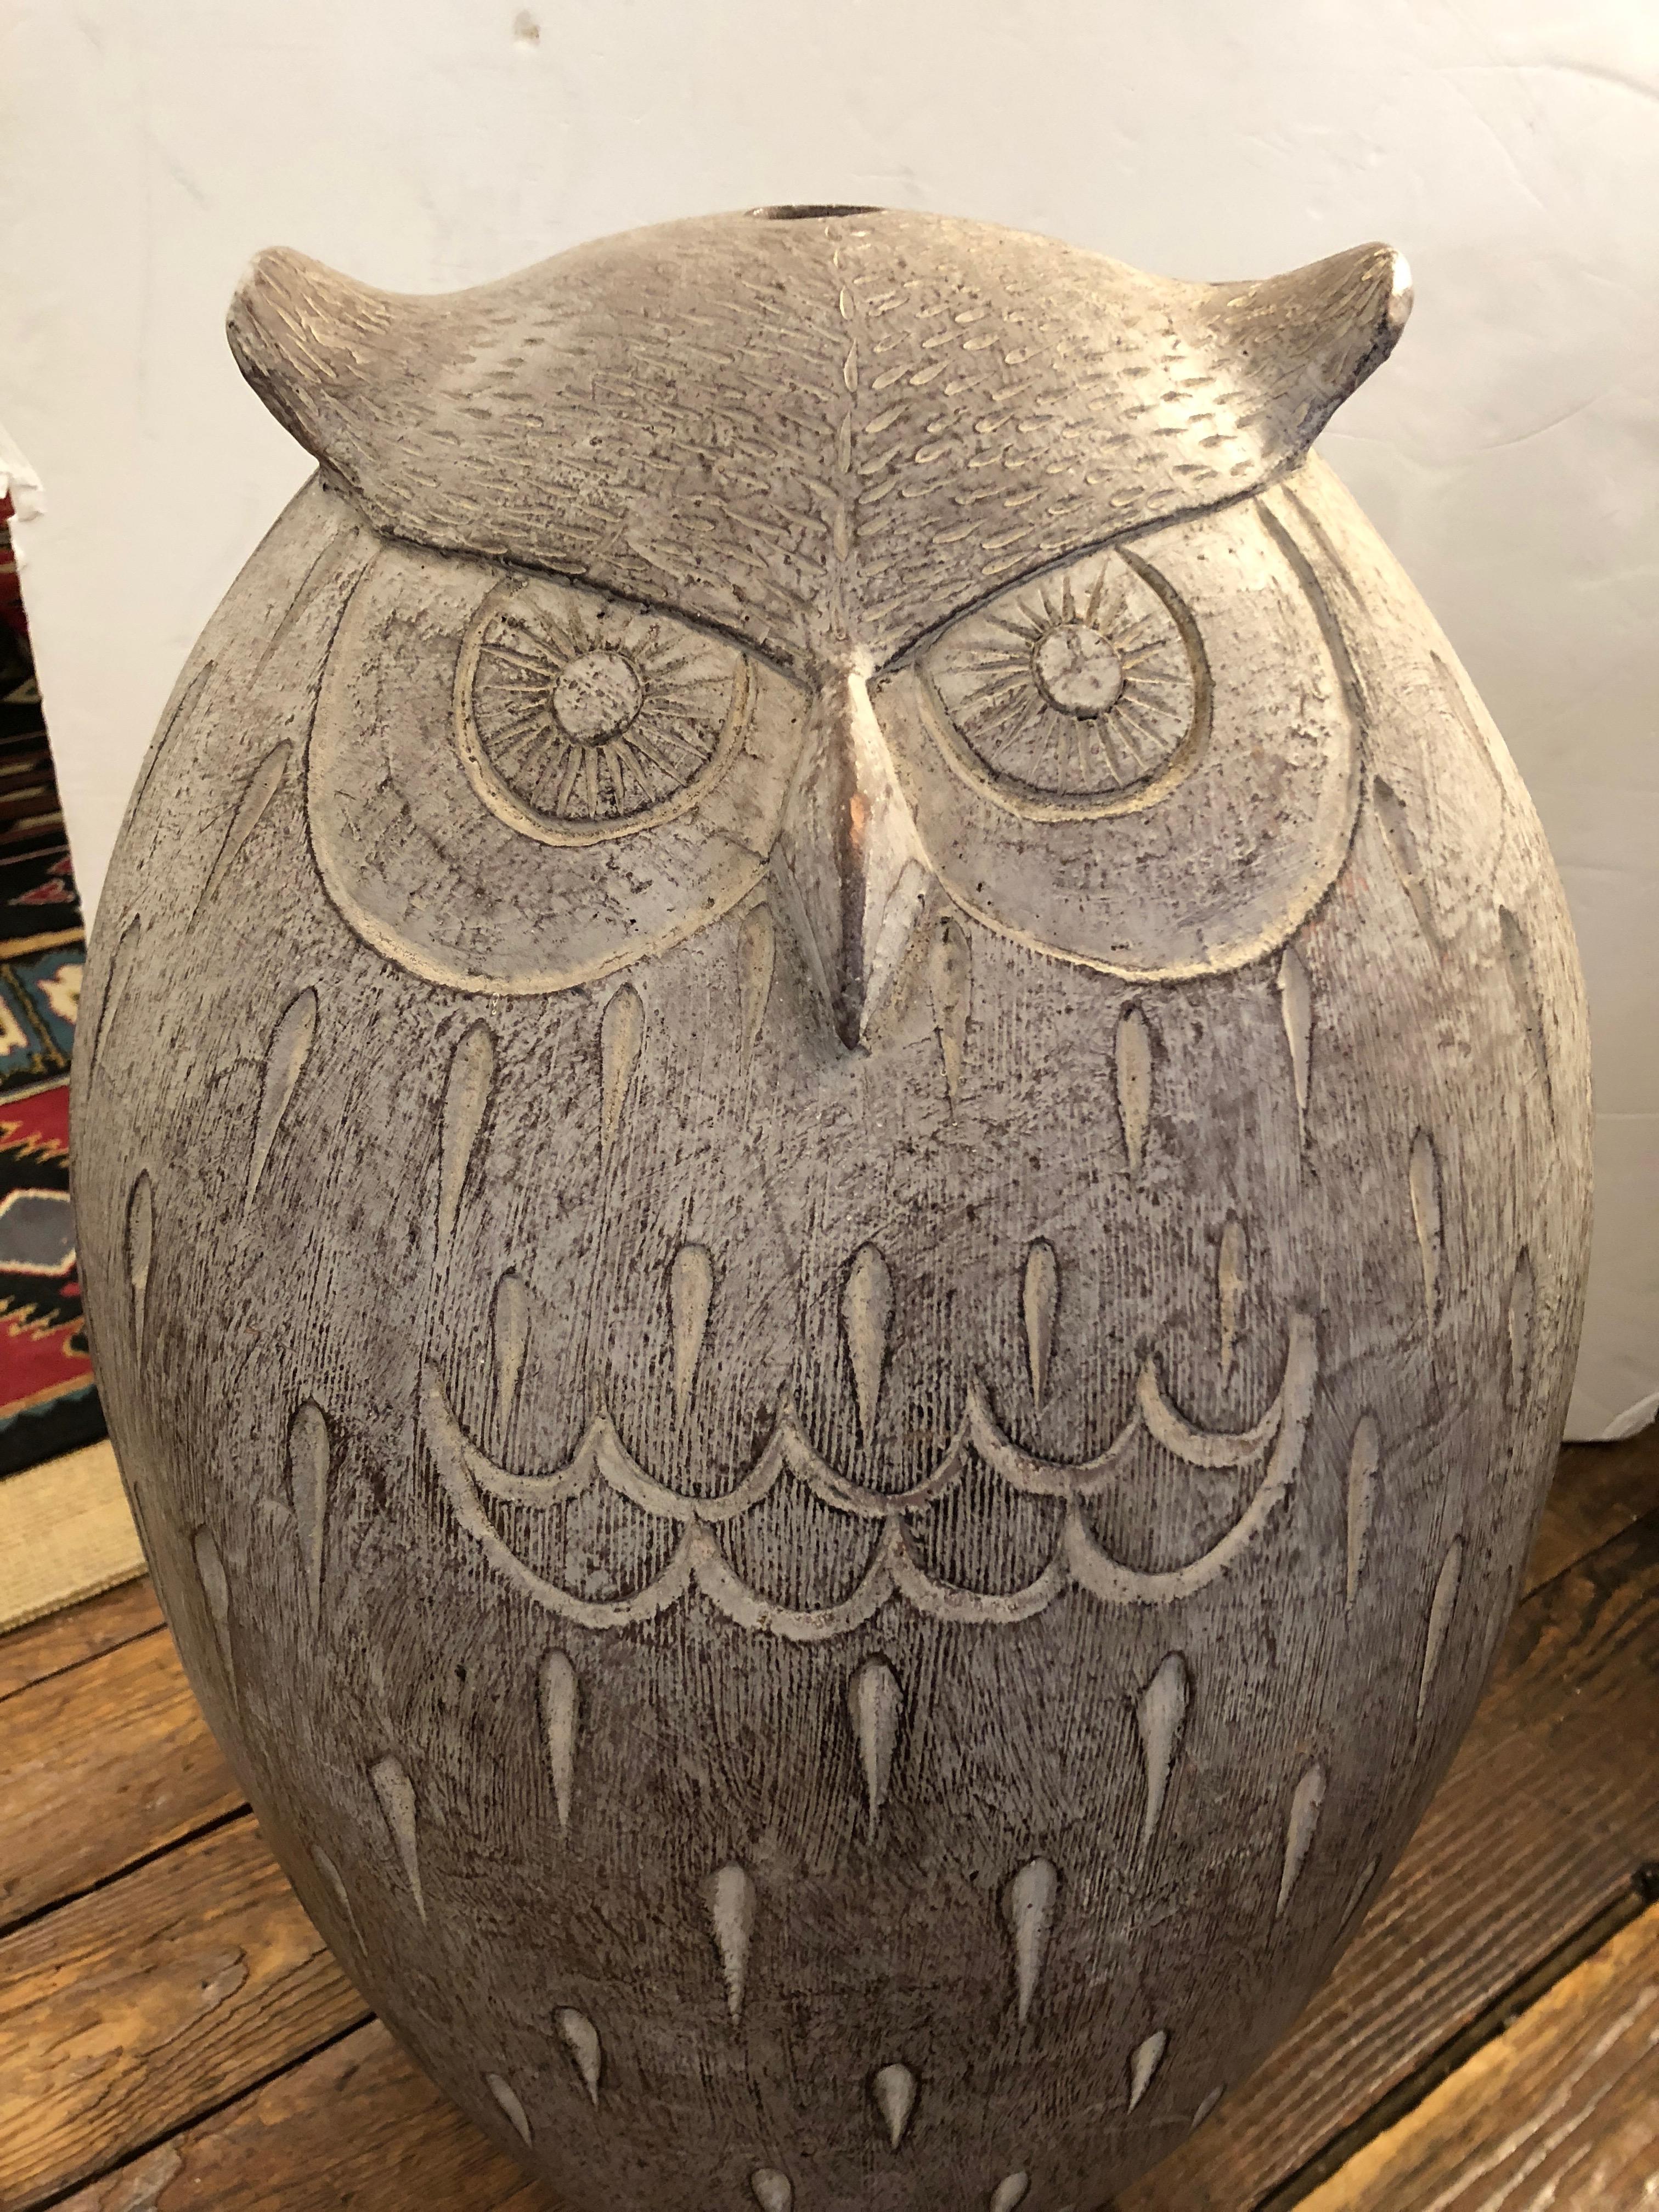 Fetching large terracotta owl sculpture that can be used indoors or in the garden, having an abstract style and faces on both sides. Color is greyish white, very neutral.